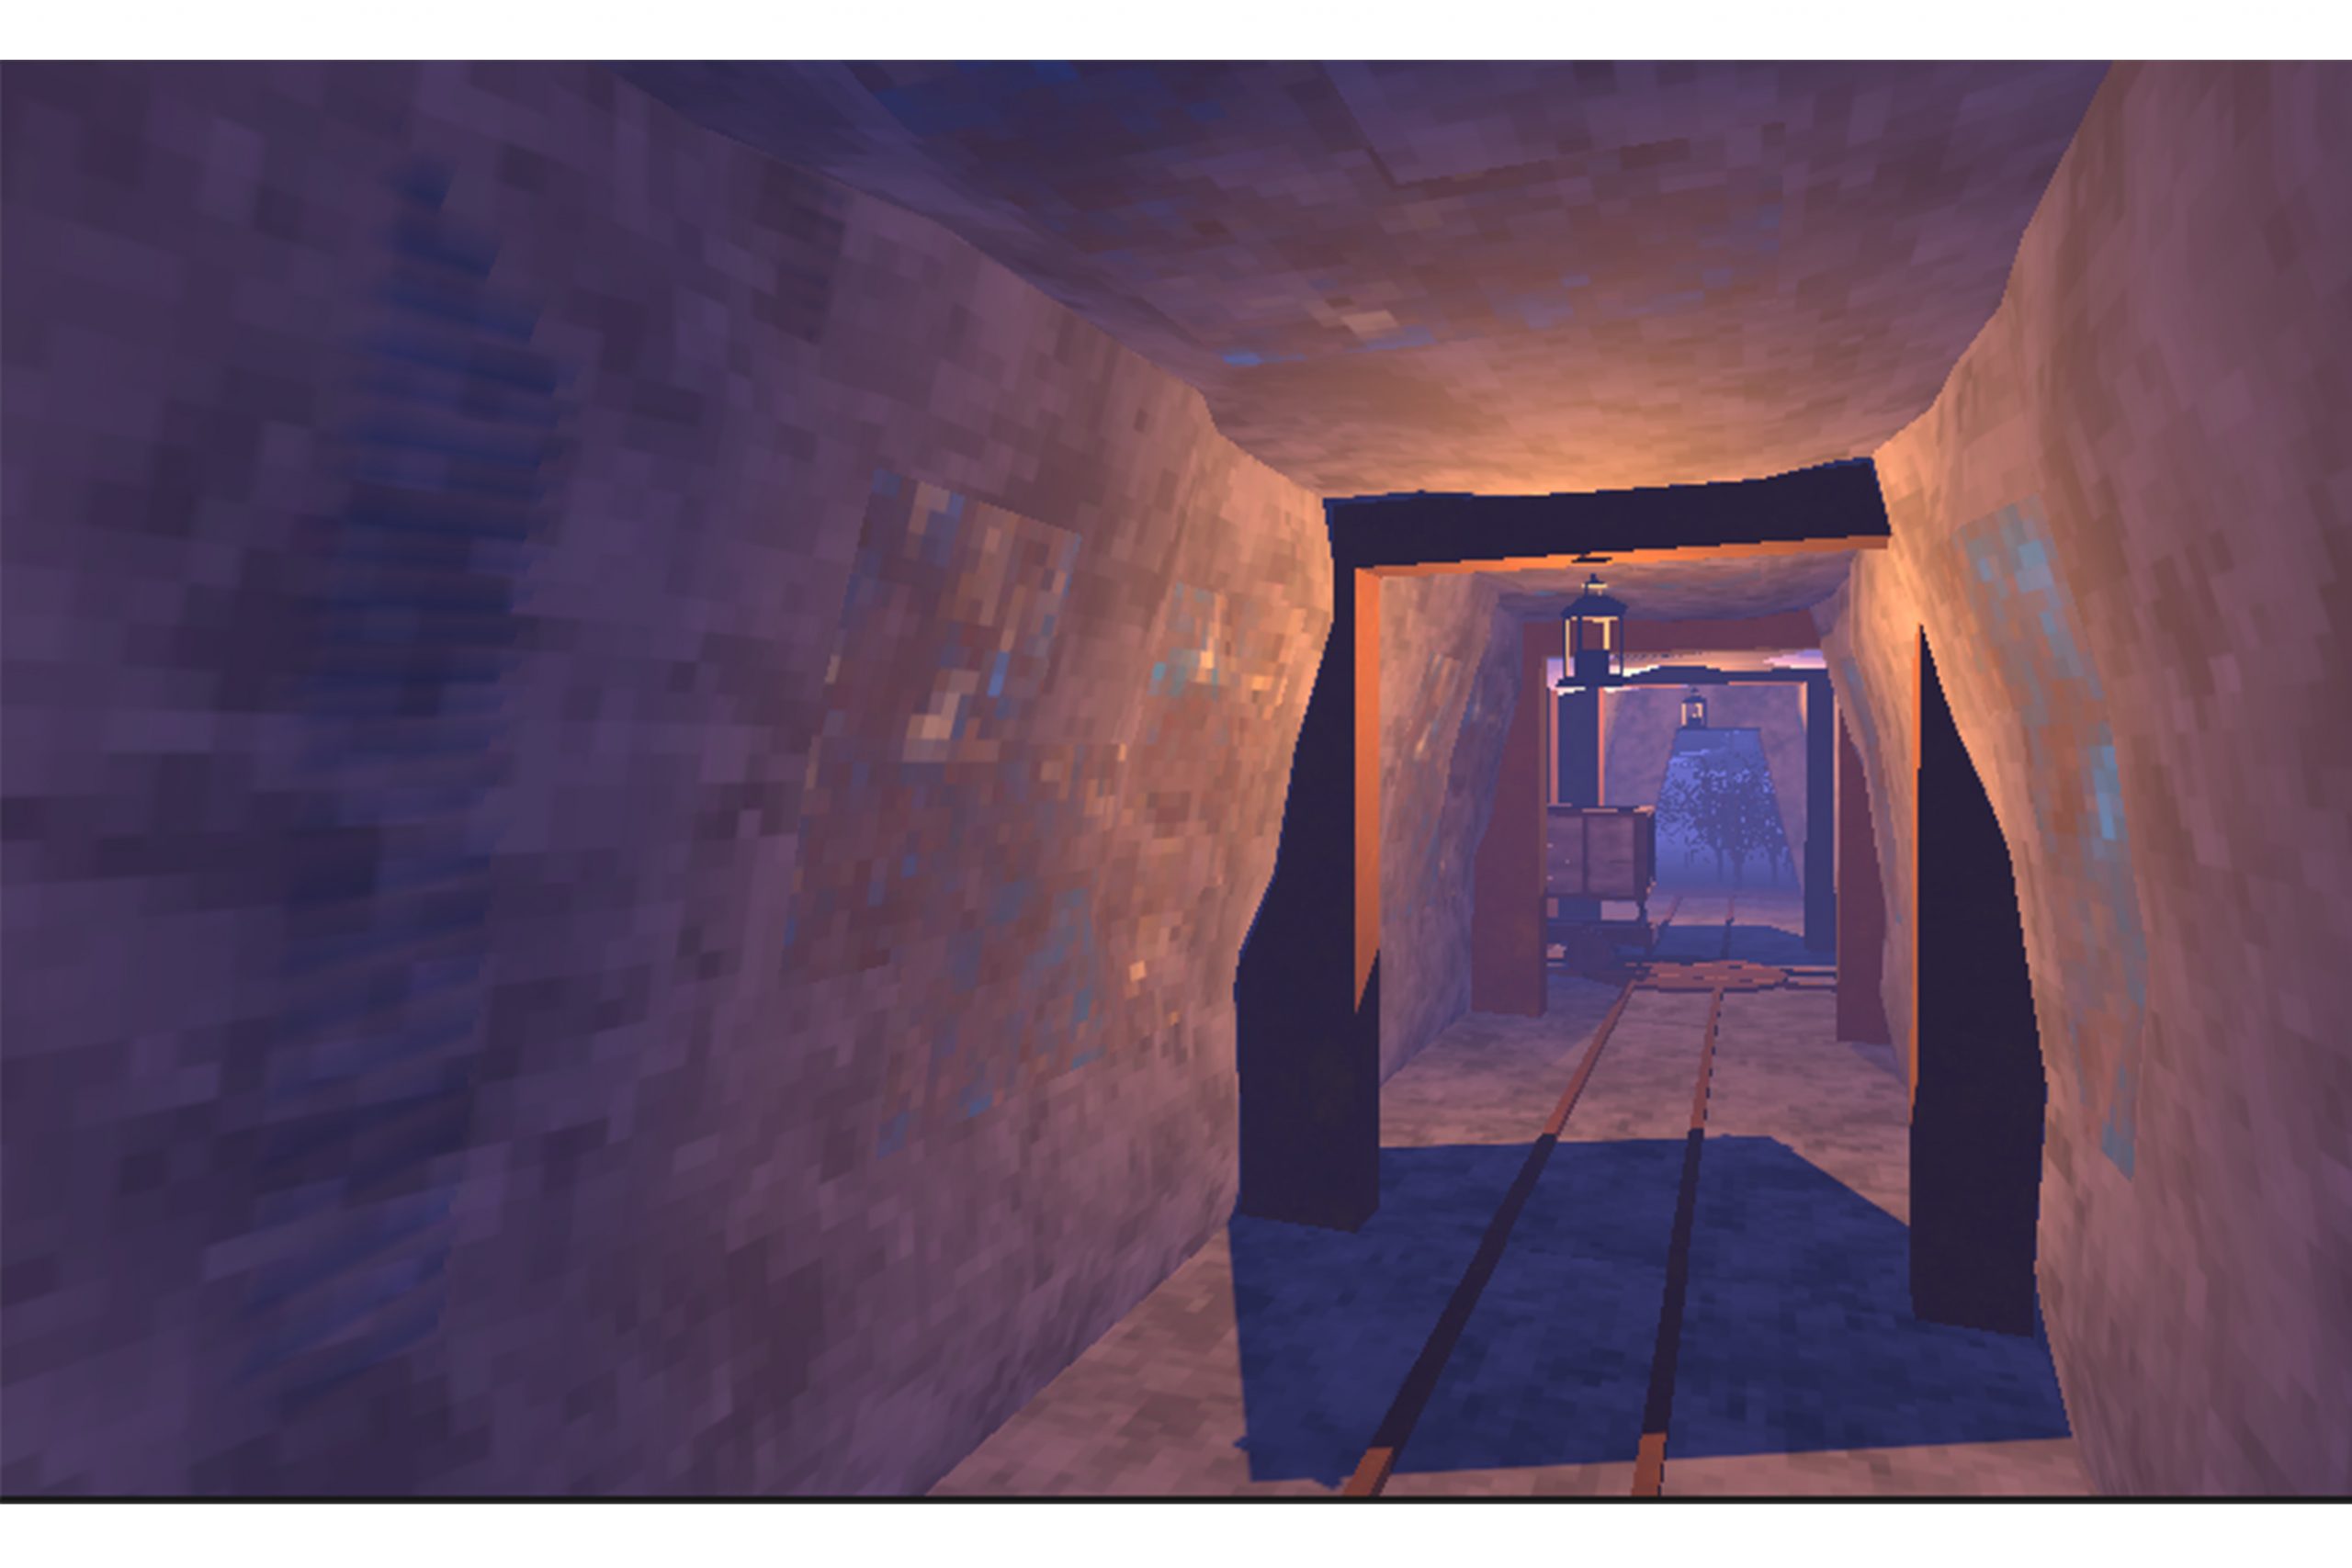 A screenshot from the game Into the Perish by Virtual Monke Studios. The image shows what appears to be a mineshaft, the outside can be seen at the end of the slightly lit tunnel.